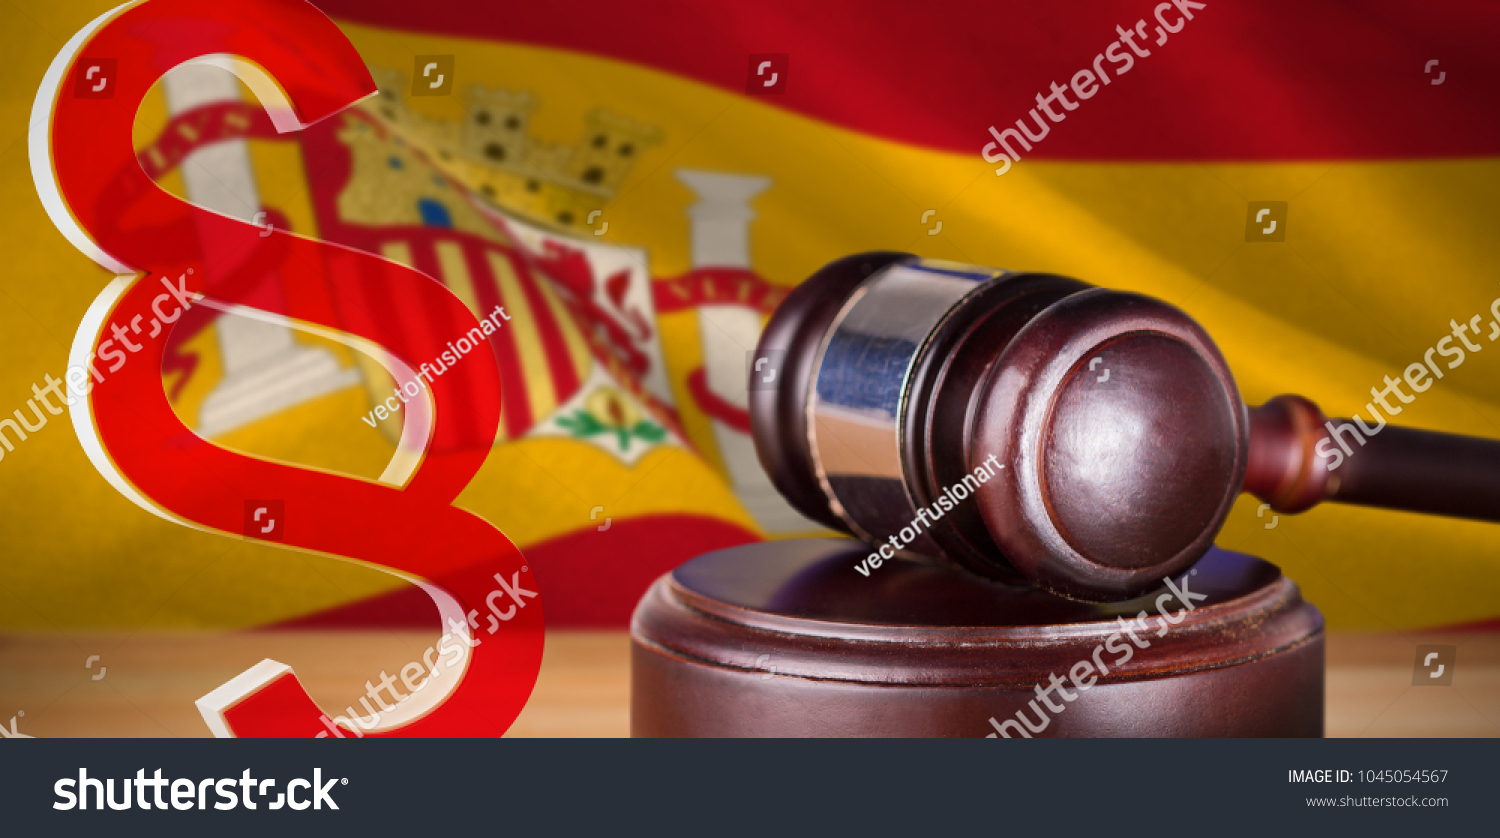 Vector icon of section symbol against digitally generated spanish national flag #1045054567